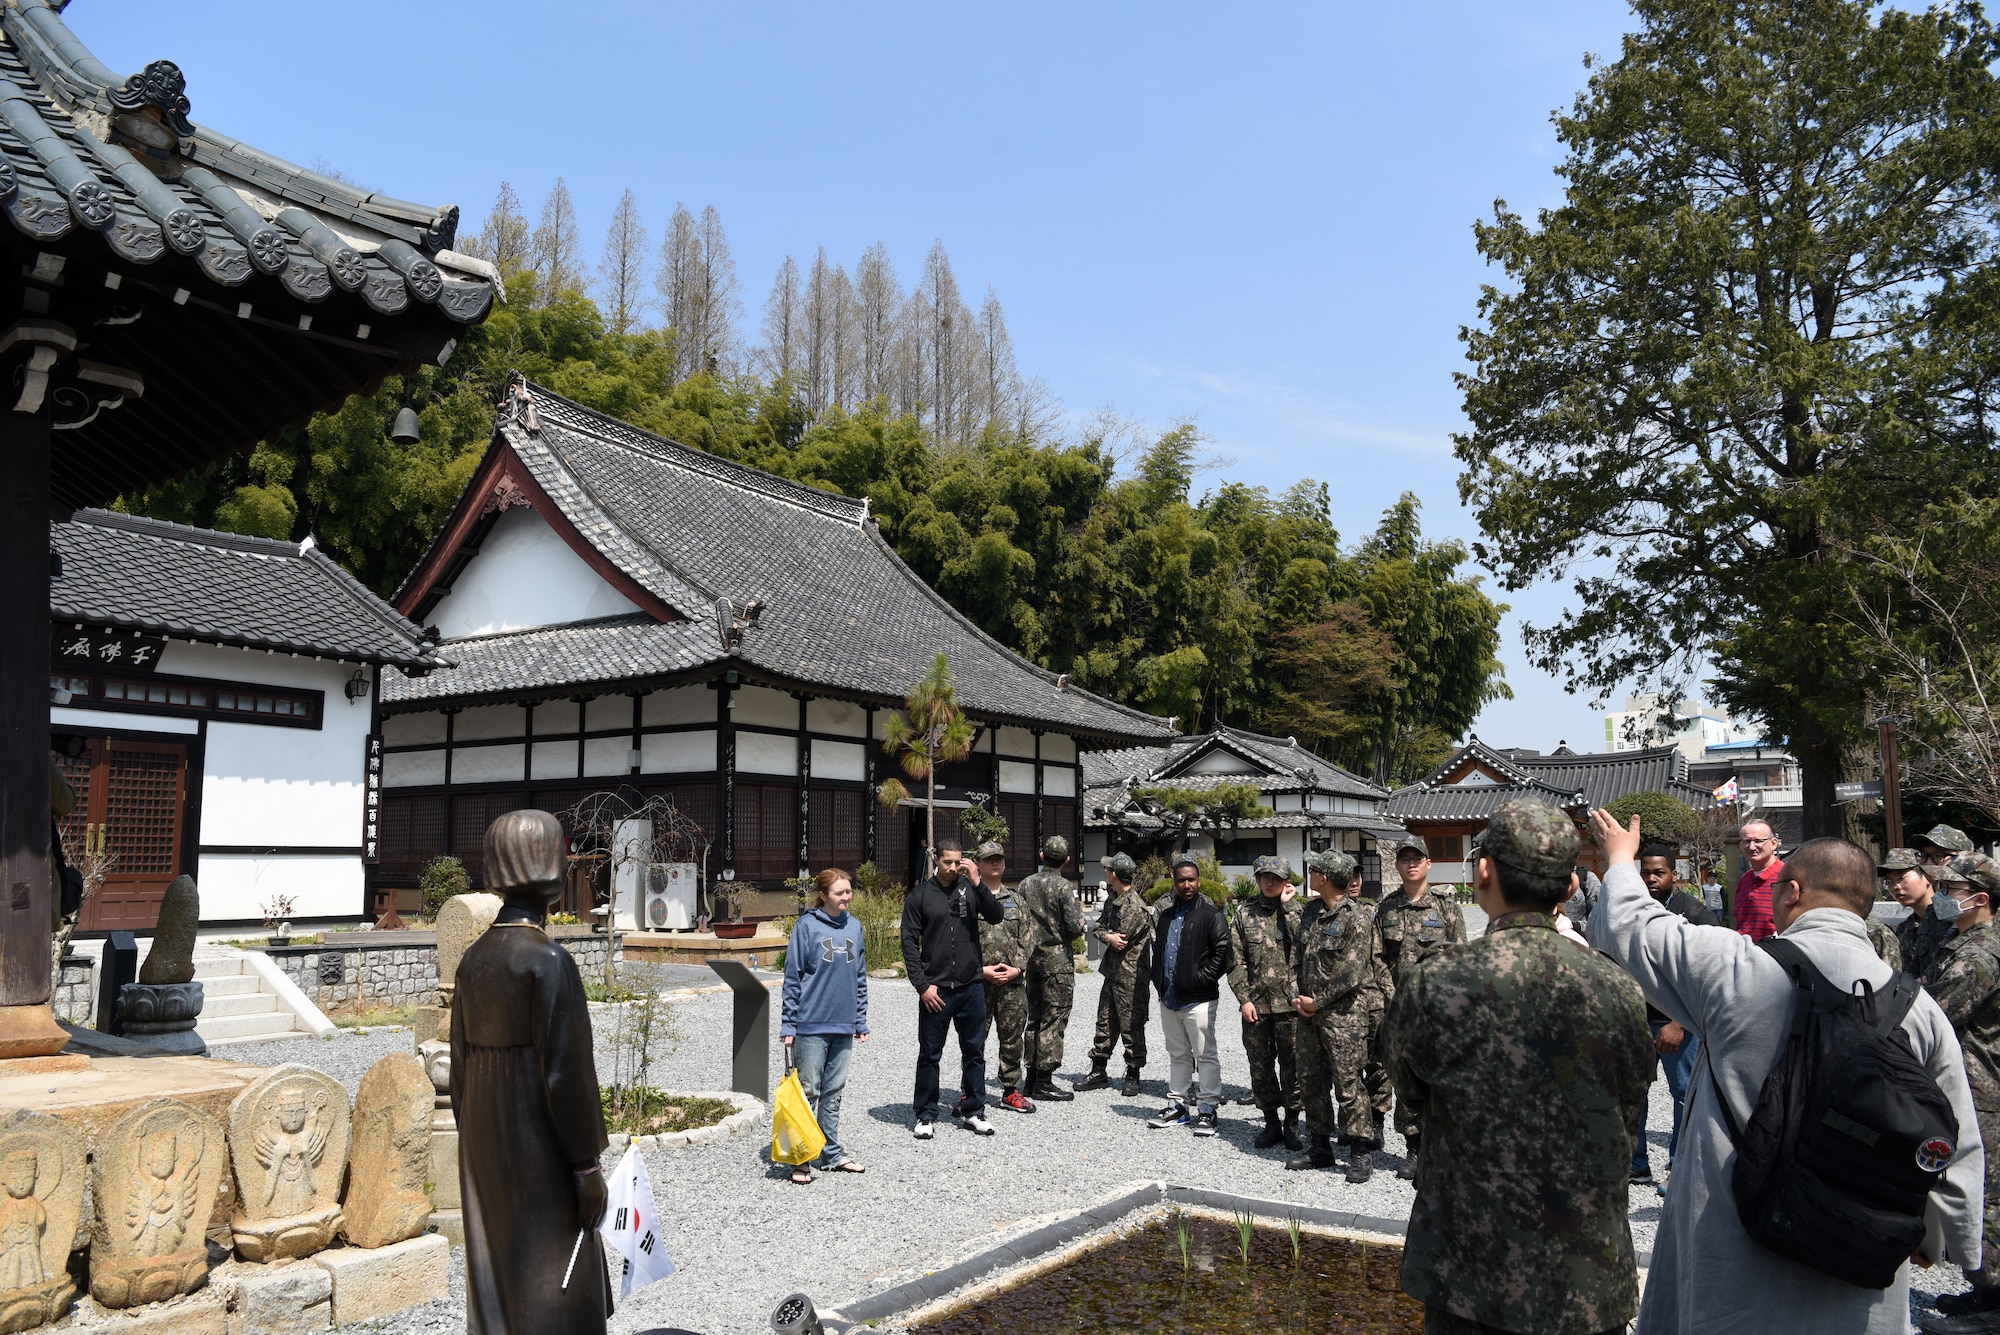 Republic of Korea Air Force Capt. Sungcheol Lee, 38th Fighter Group chaplain, talks about the differences between Japanese and Korean Buddhist temples at Dongguksa Temple in Gunsan City, Republic of Korea, April 13, 2019. Lee explained that the Japanese architectural style shows wood in a more natural state, while Korean style features colorful designs on the wood. (U.S. Air Force photo by Staff Sgt. Joshua Edwards)